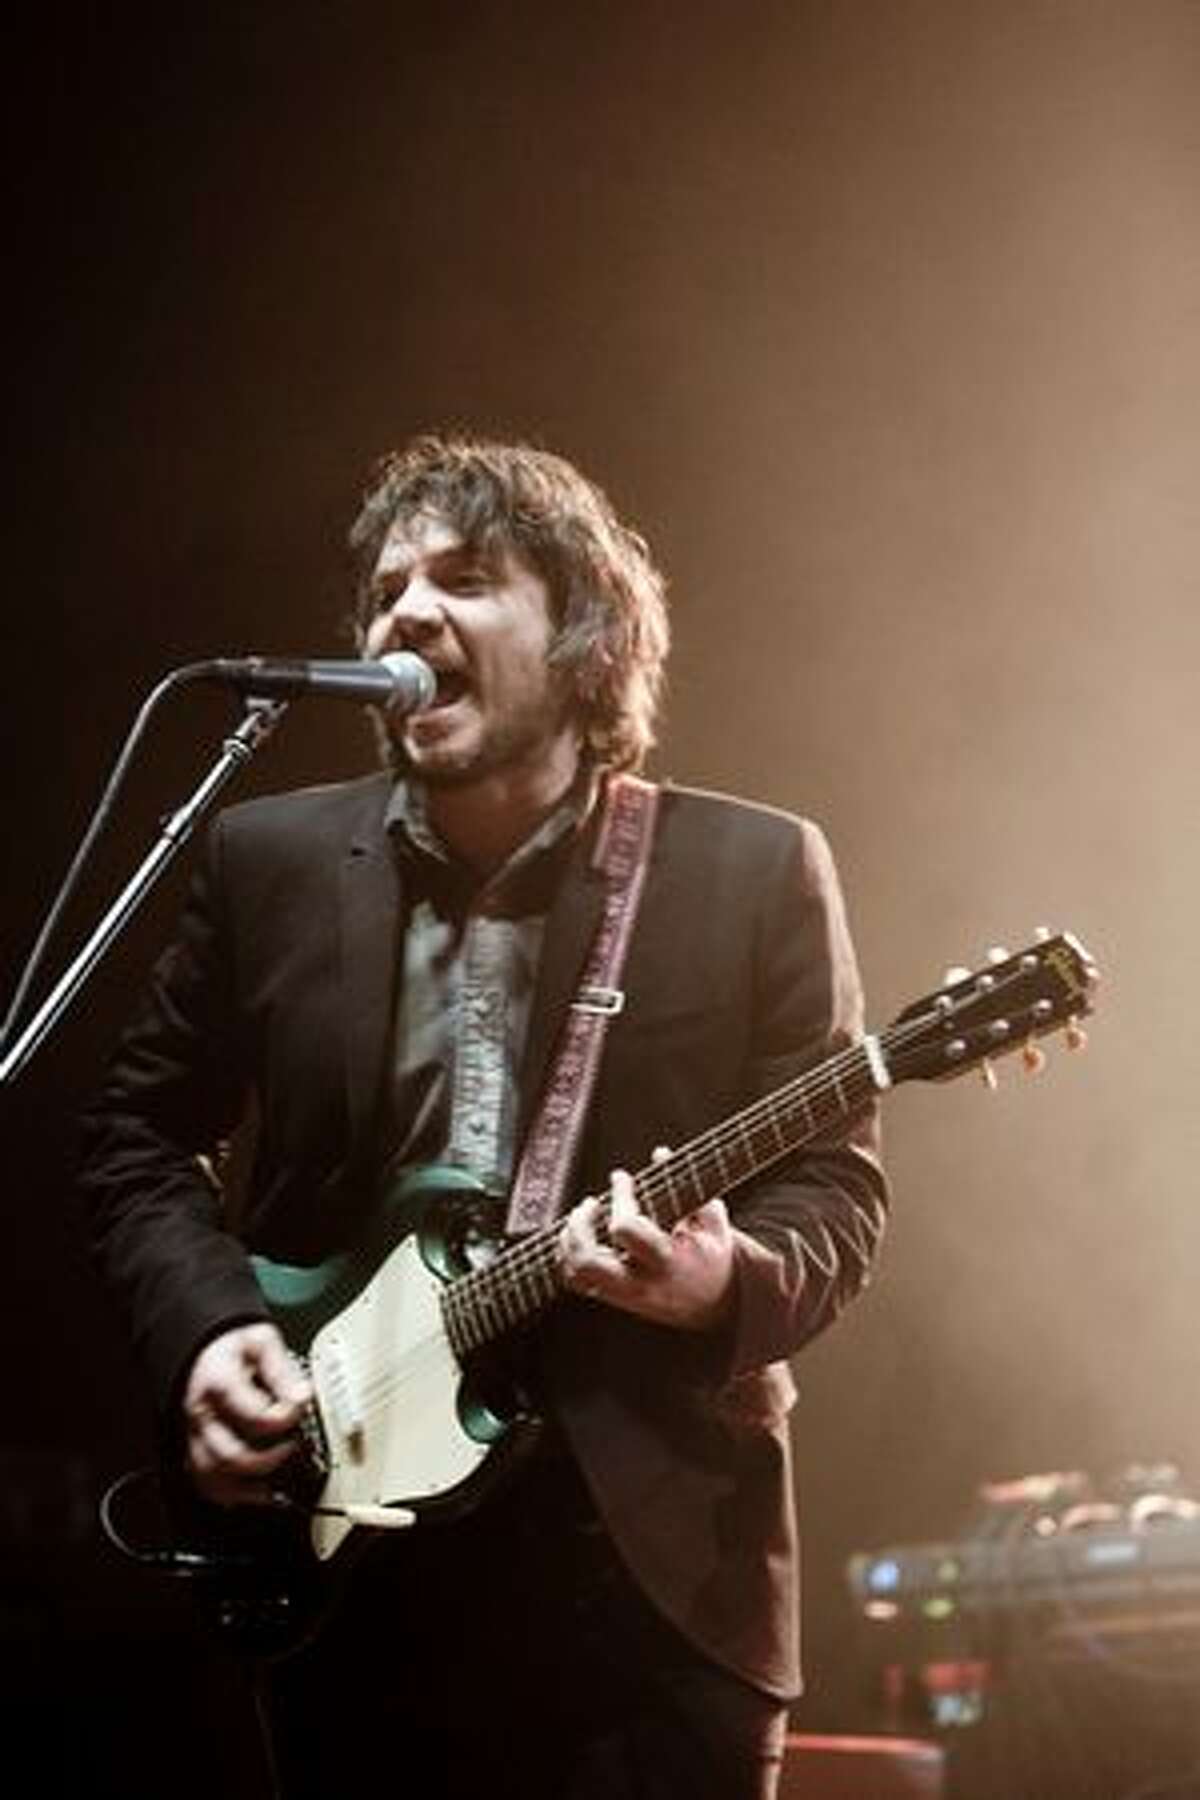 Front man Jeff Tweedy of Wilco performing at the Paramount Theatre on Feb. 10. (Chona Kasinger/seattlepi.com)